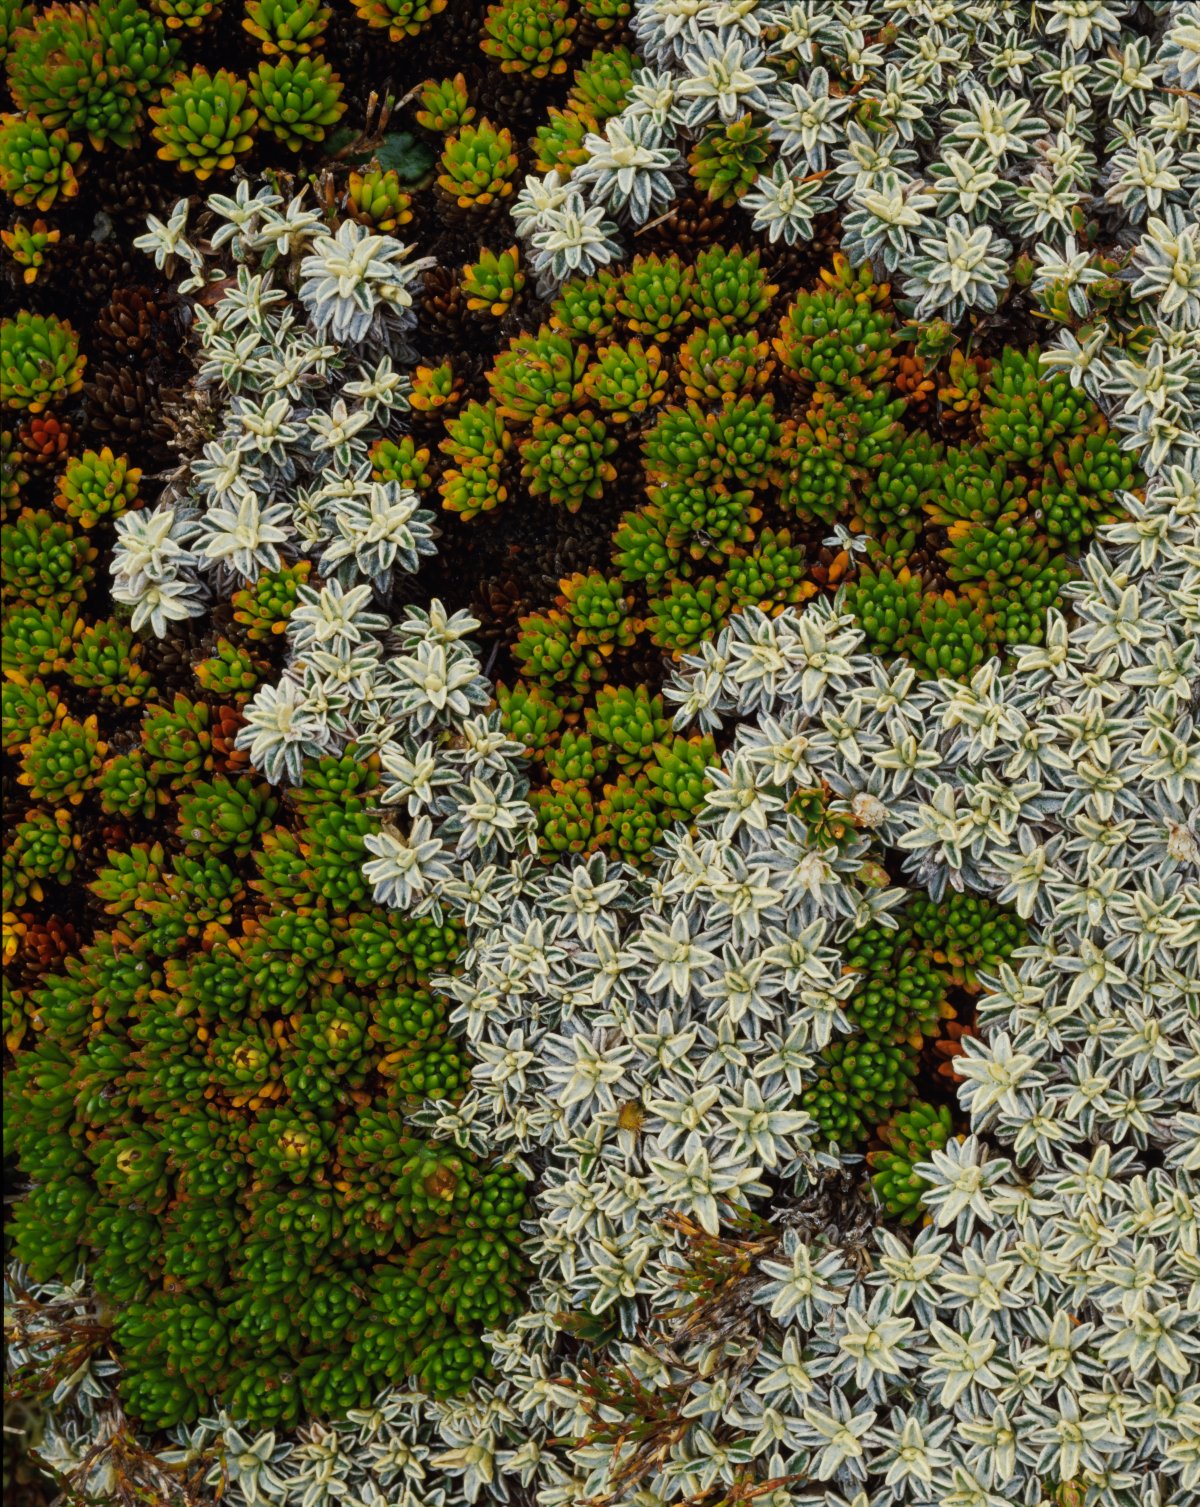 A carpet of white and green flowers and leaves.